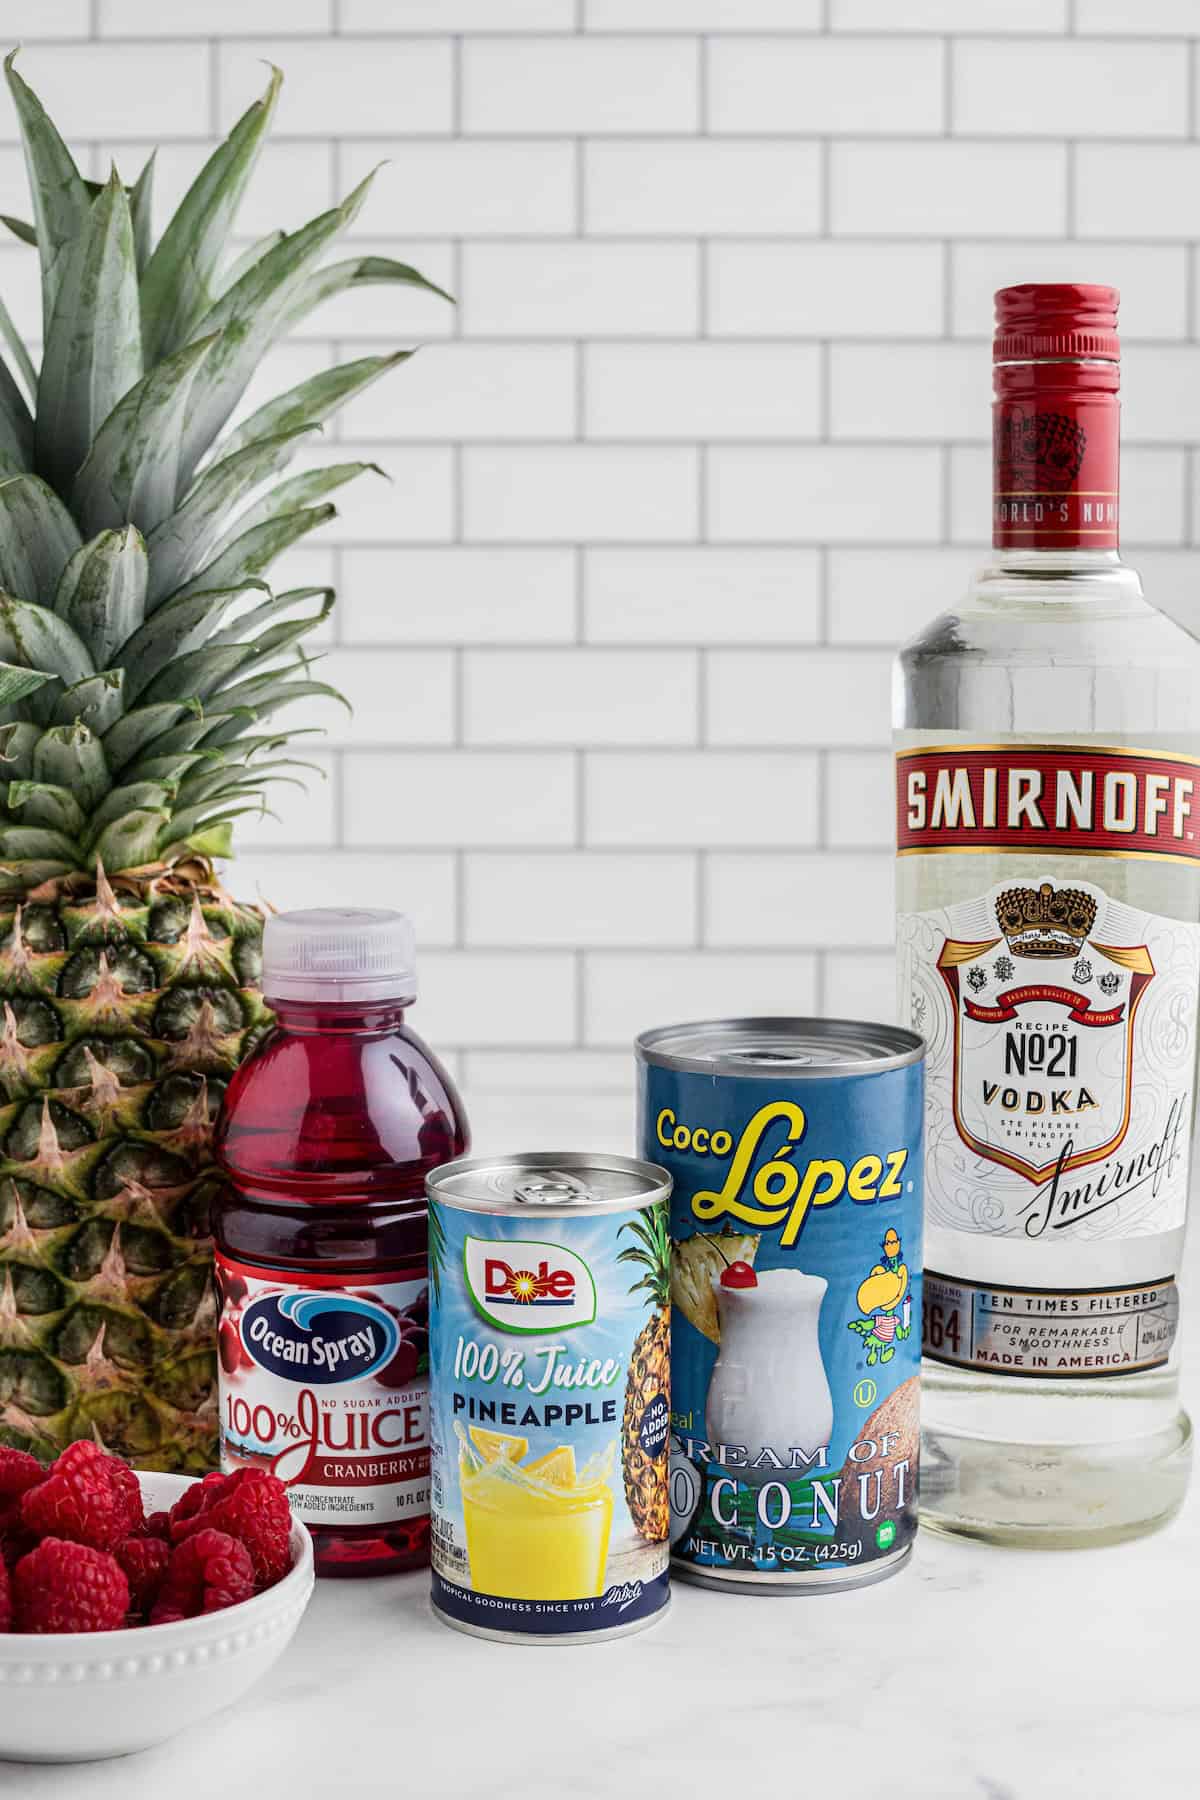 A list of ingredients that are needed for the recipe: Vodka, pineapple juice, coconut cream, cranberry juice and fresh raspberries.